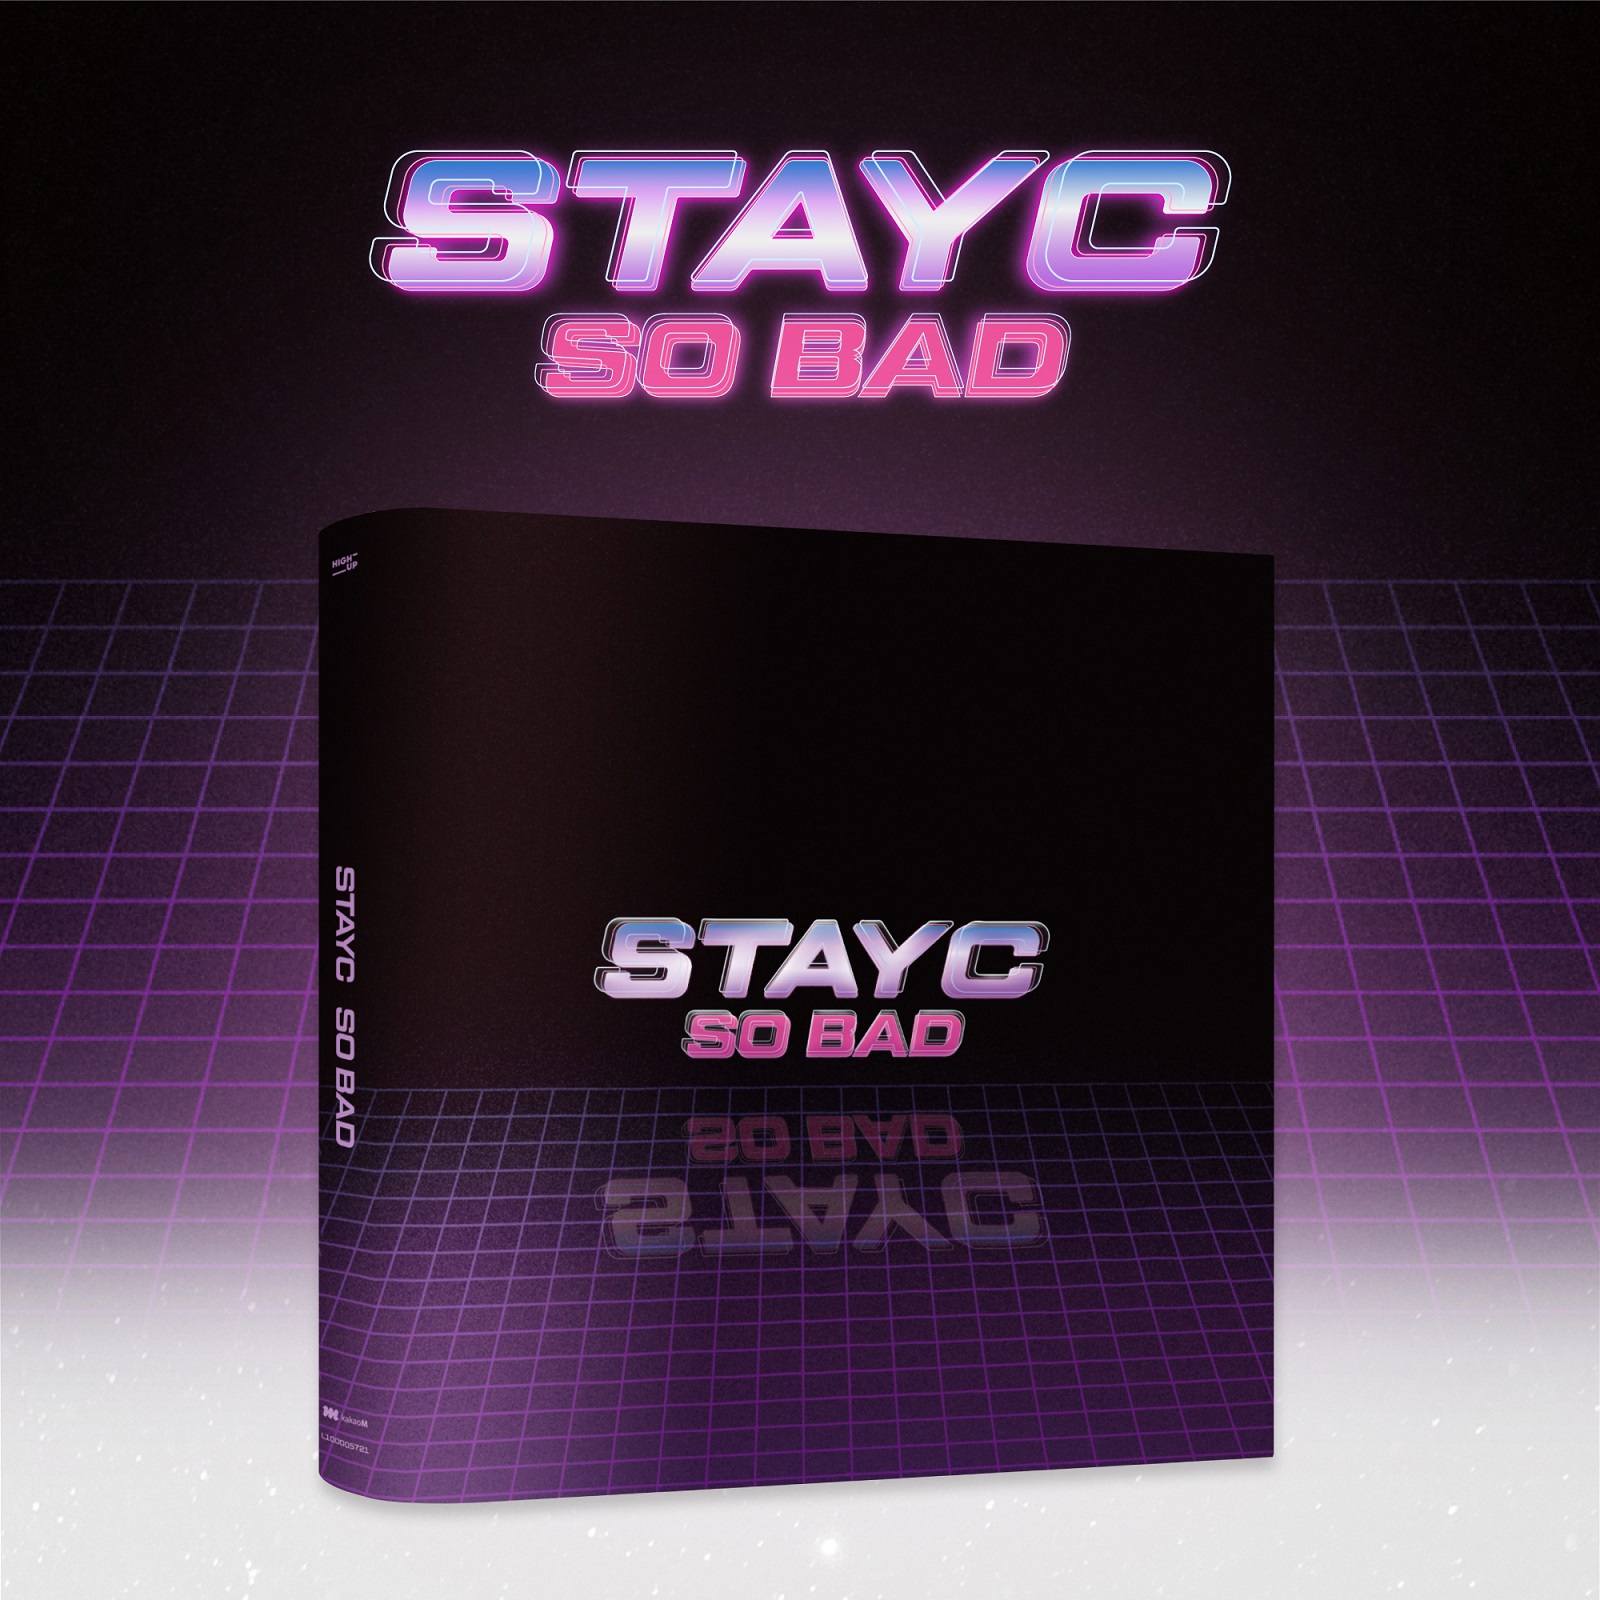 [PRE-ORDER] STAYC - Single Vol.1 [Star To A Young Culture]케이팝스토어(kpop store)